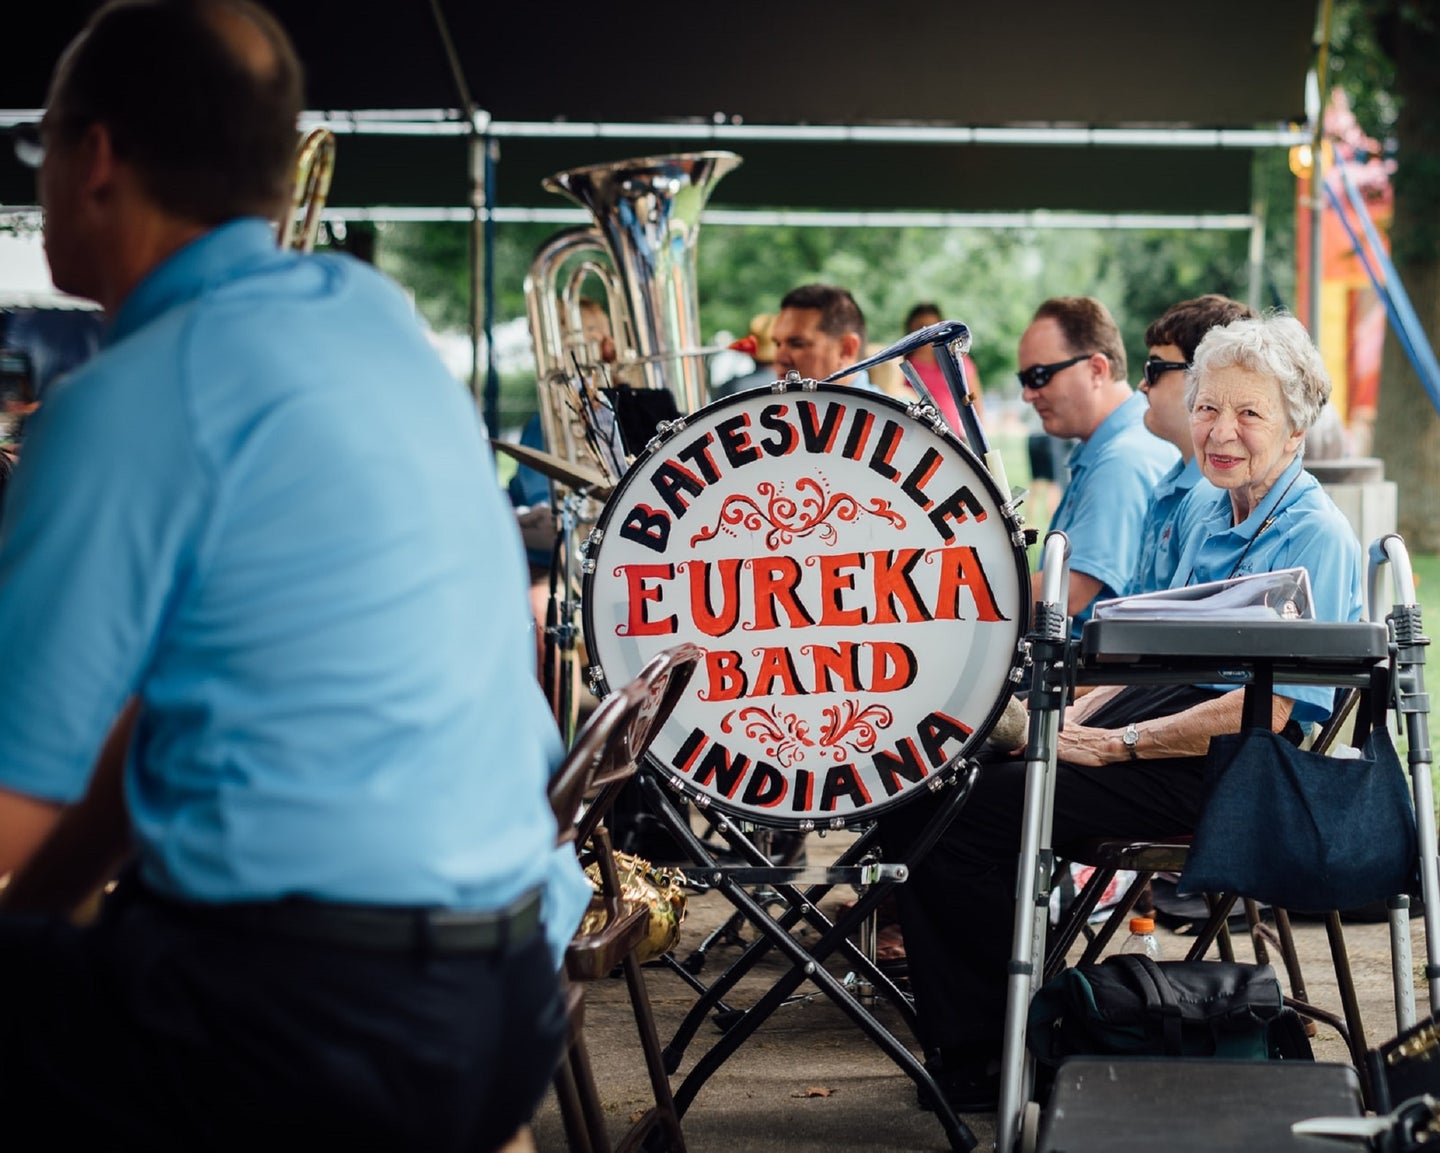 Elderly person in a blue uniform sitting next to a marching band drum that says Batesville Eureka Band Indiana